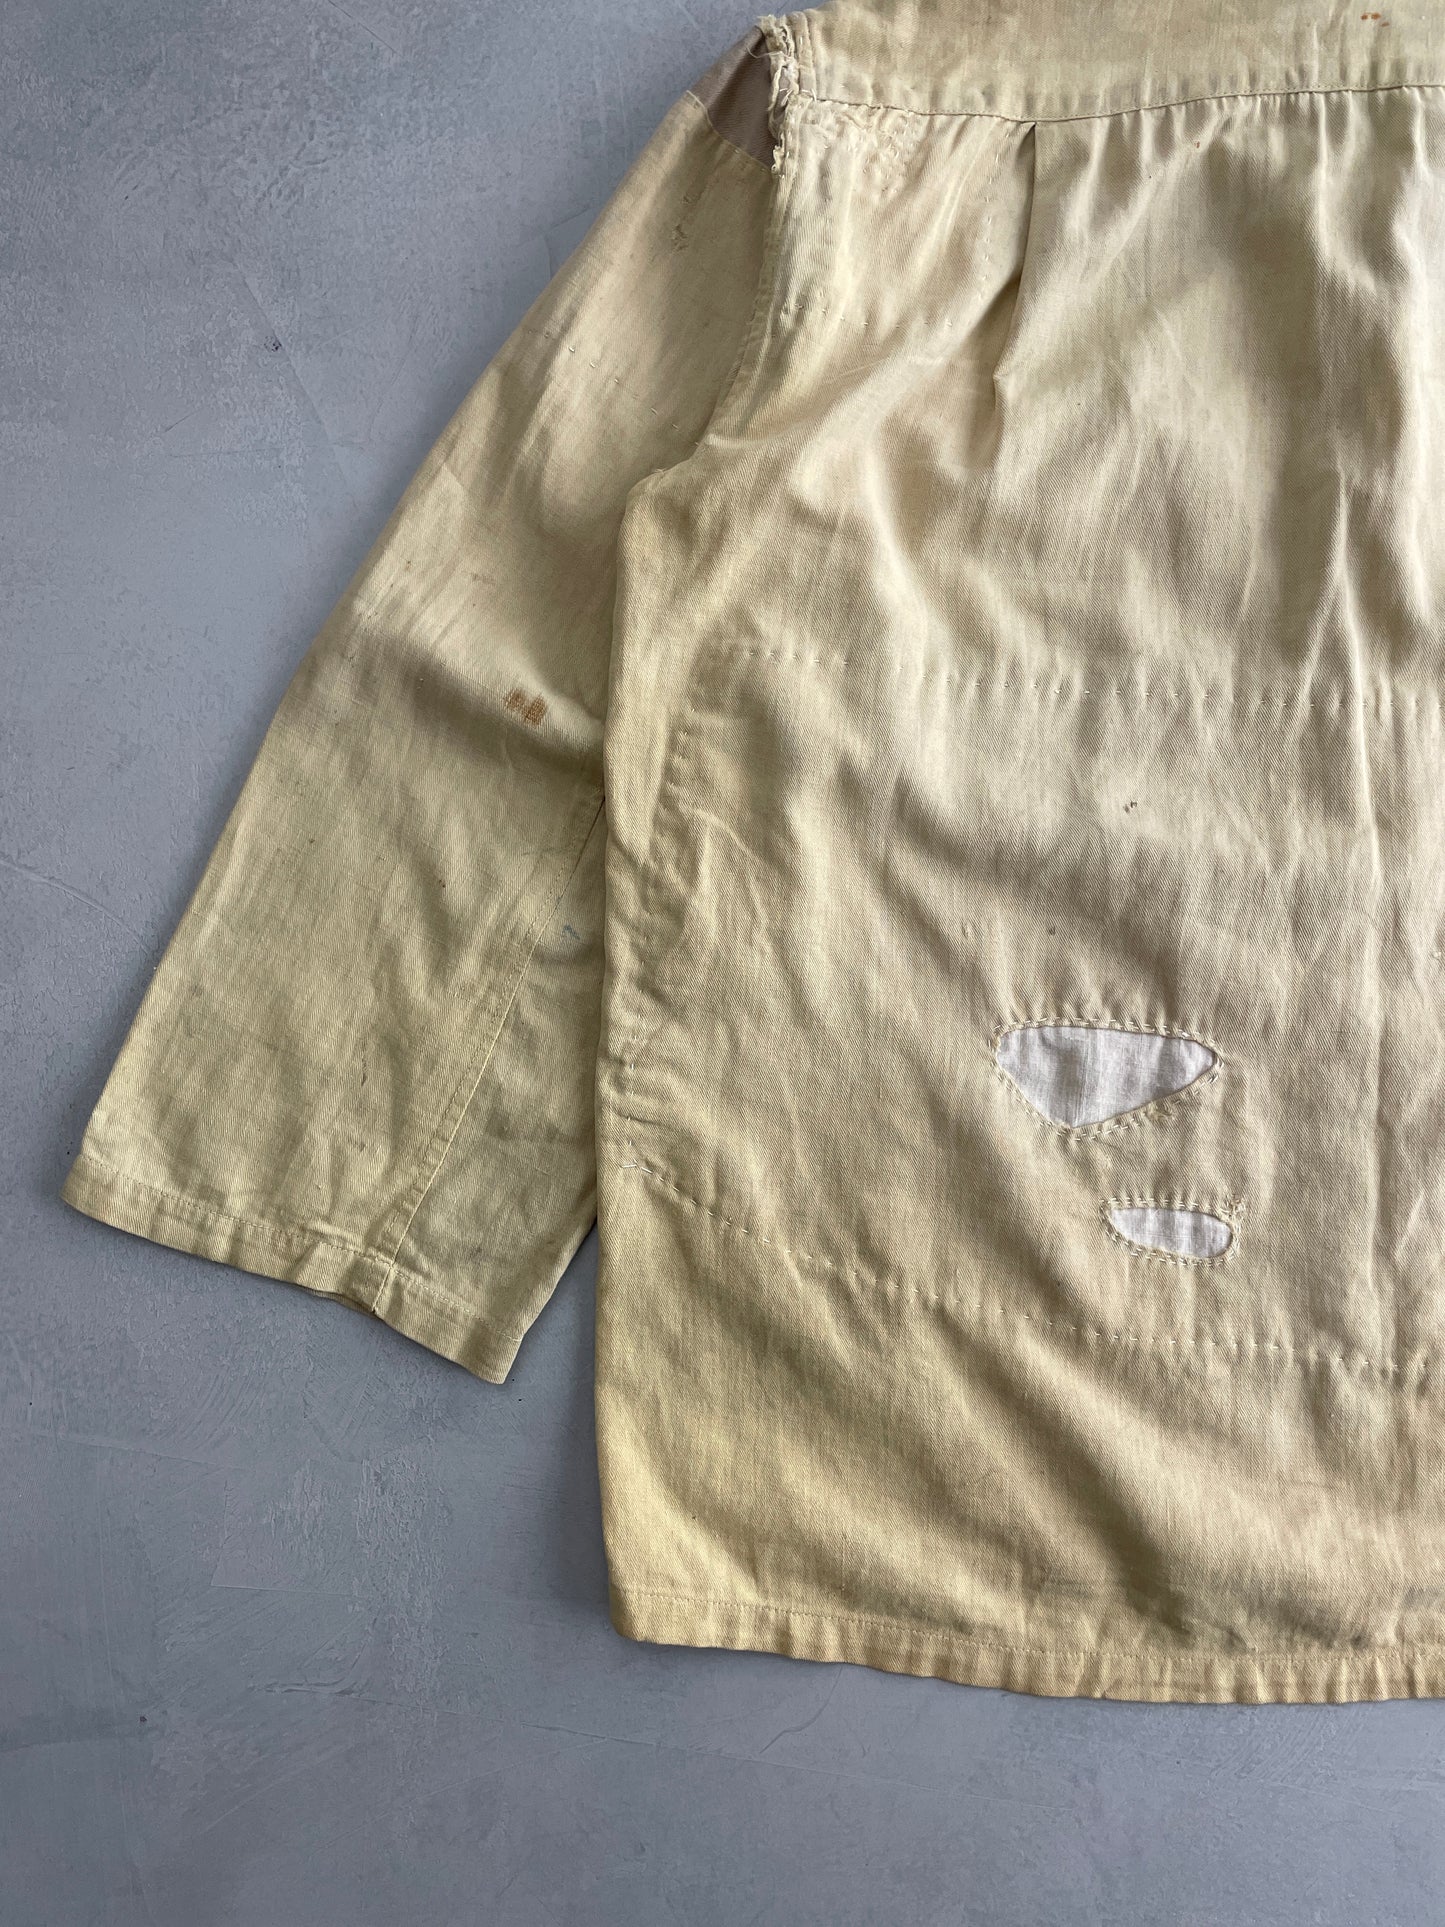 40's Japanese Patch/Repaired Work Shirt [S]